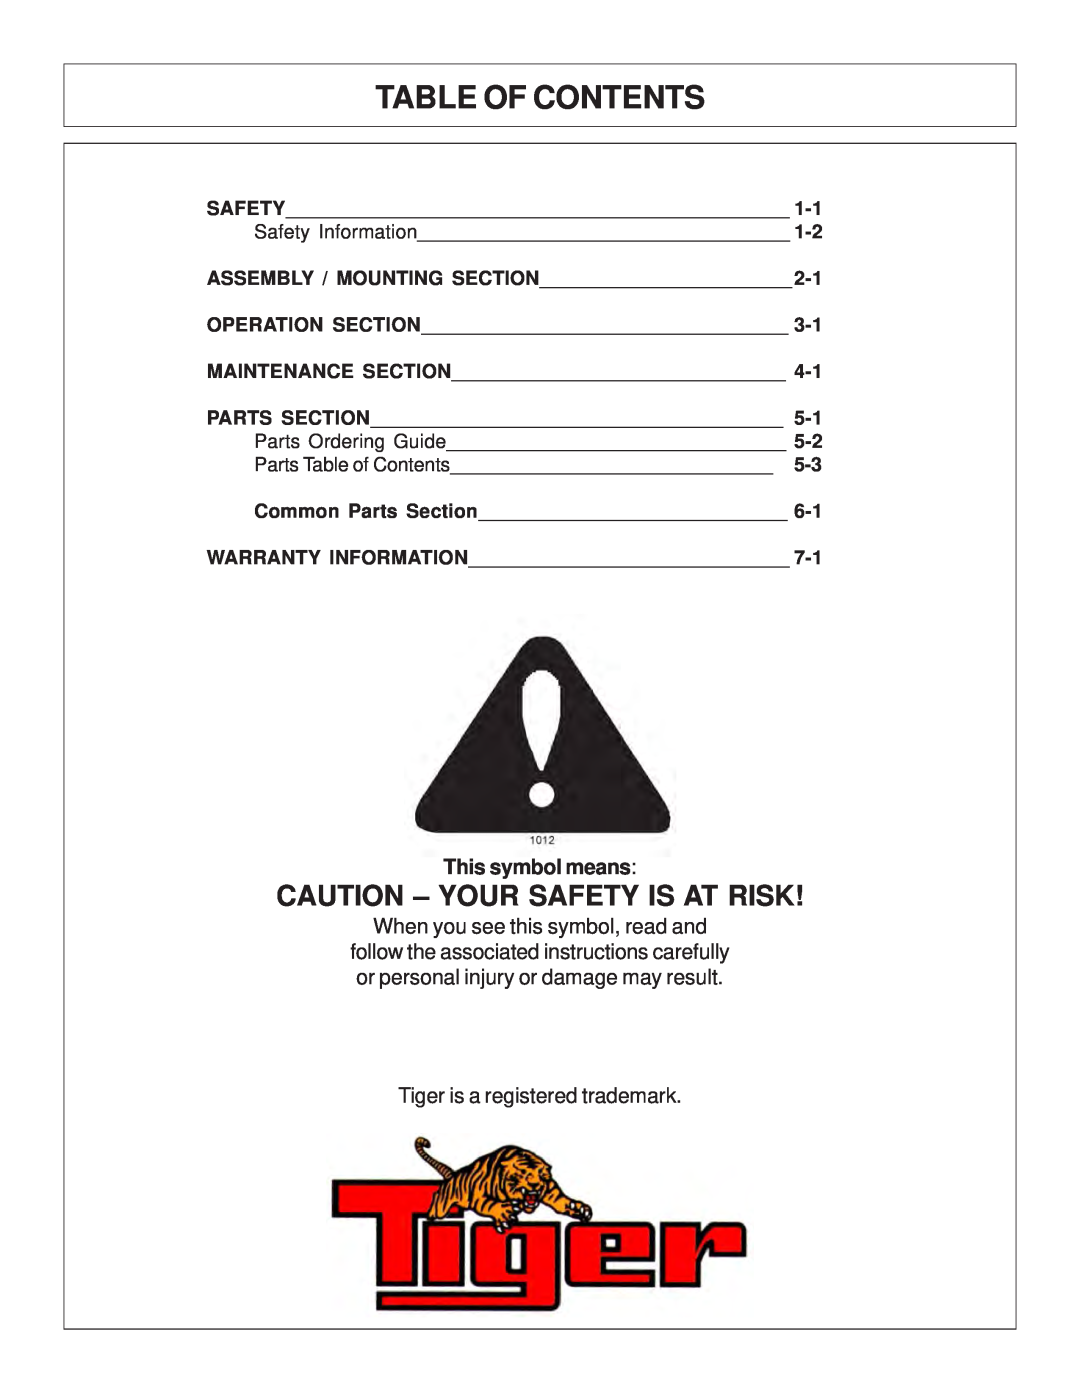 Tiger Products Co., Ltd 6020009 manual Table Of Contents, Caution - Your Safety Is At Risk, This symbol means 